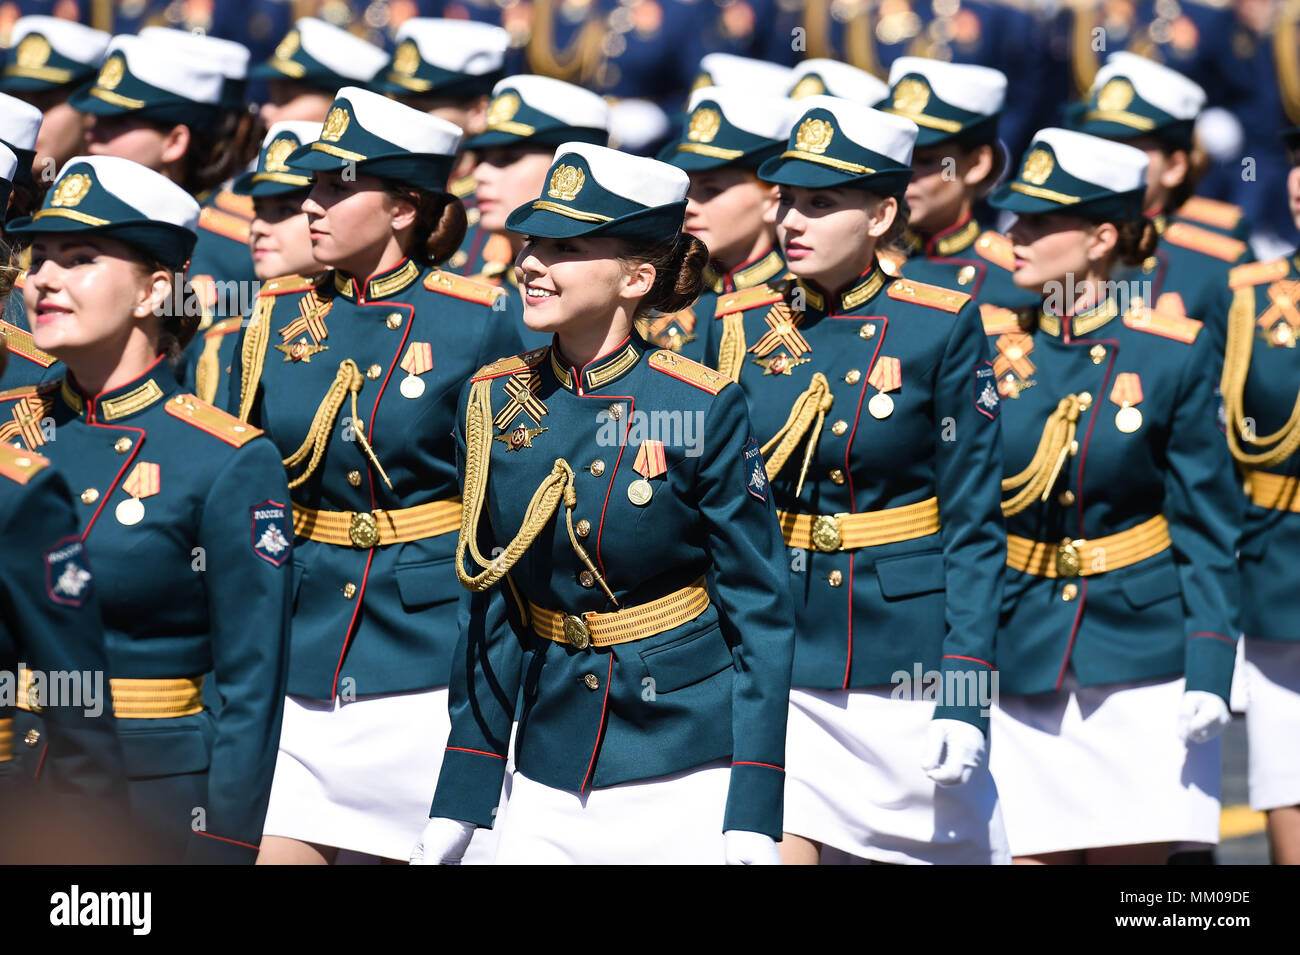 Moscow, Russia. 9th May, 2018. Russian female soldiers march during the Victory Day parade in Moscow, Russia, May 9, 2018. The 73rd anniversary of the victory over Nazi Germany in World War Two was marked here on Wednesday. Credit: Evgeny Sinitsyn/Xinhua/Alamy Live News Stock Photo